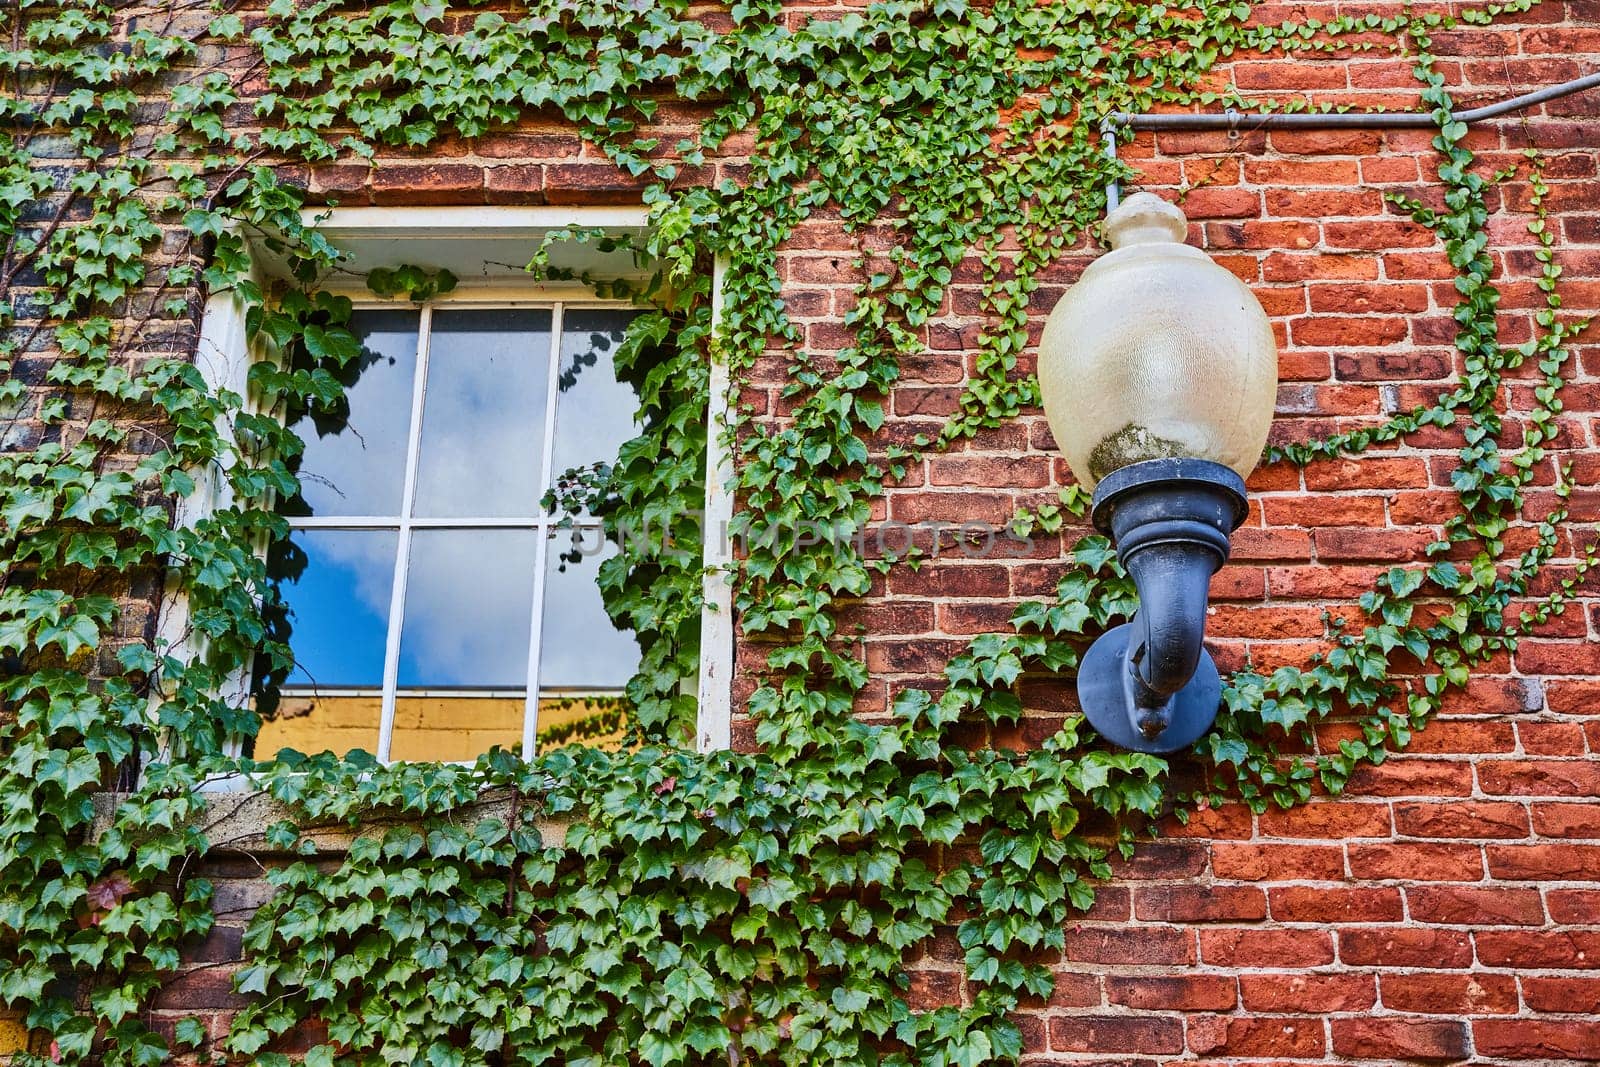 Image of Red brick wall with green ivy vines of plant growing around window and old, retro light, summer